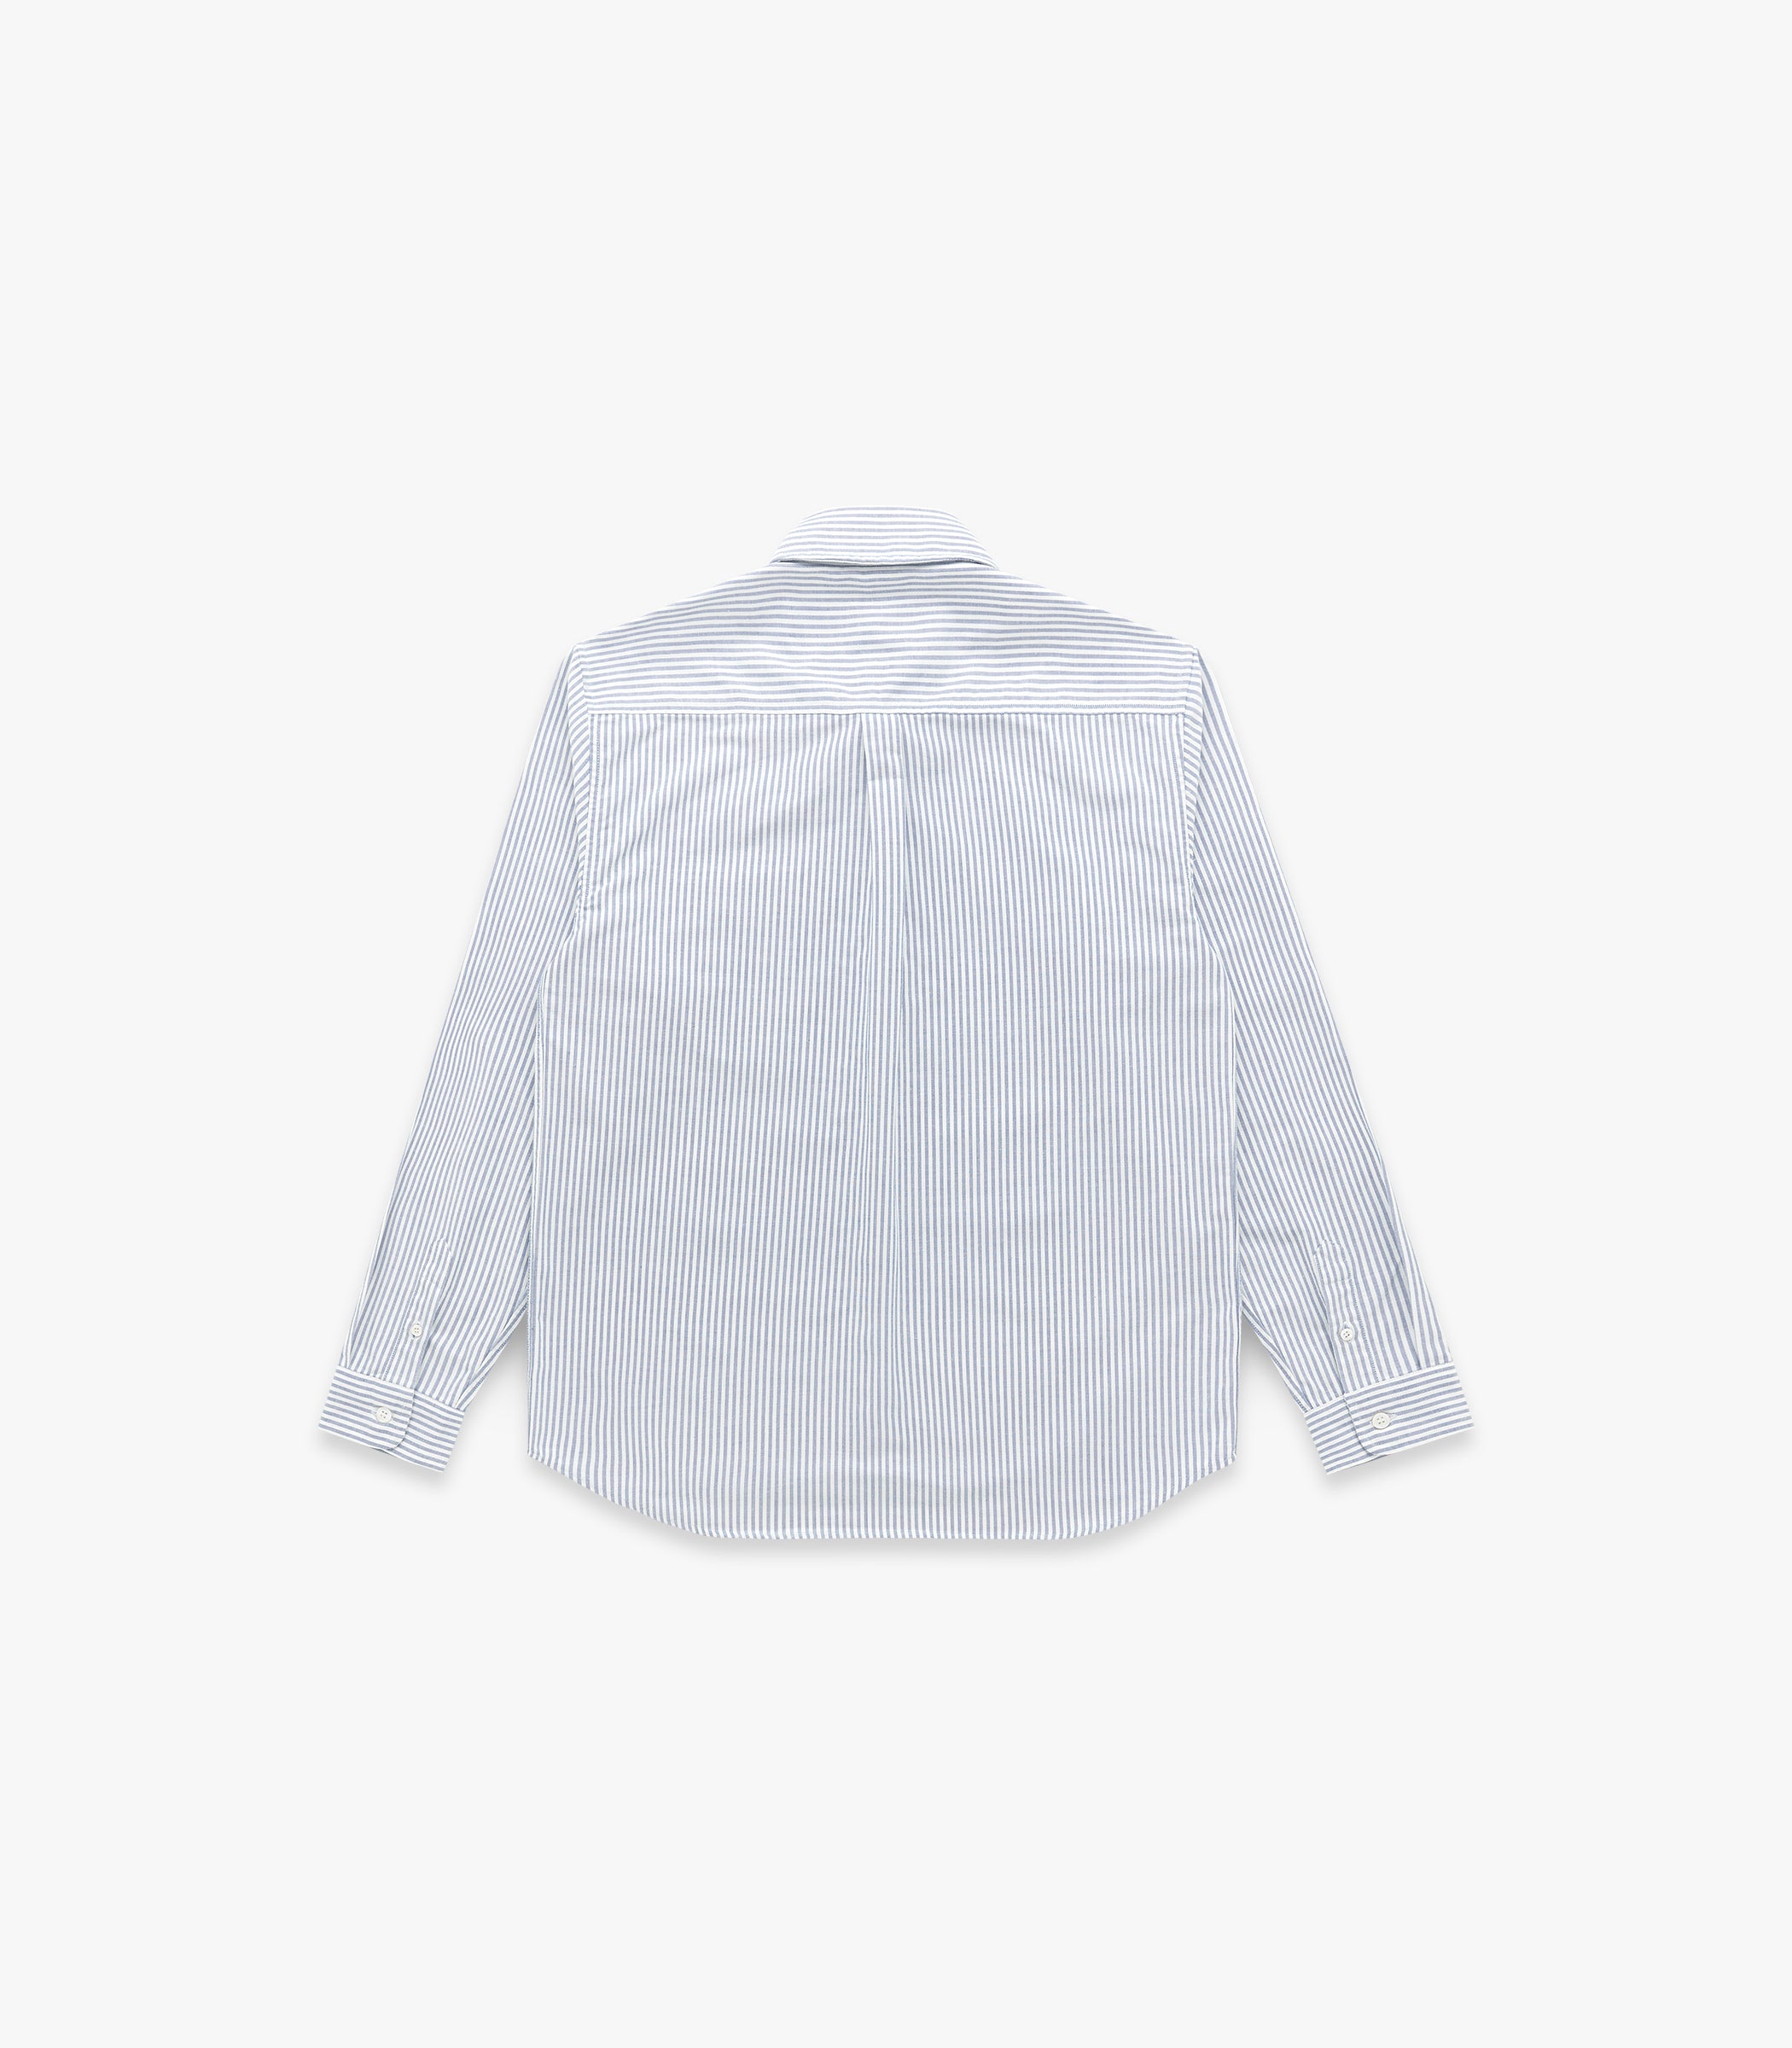 "Beefy" Cotton Oxford